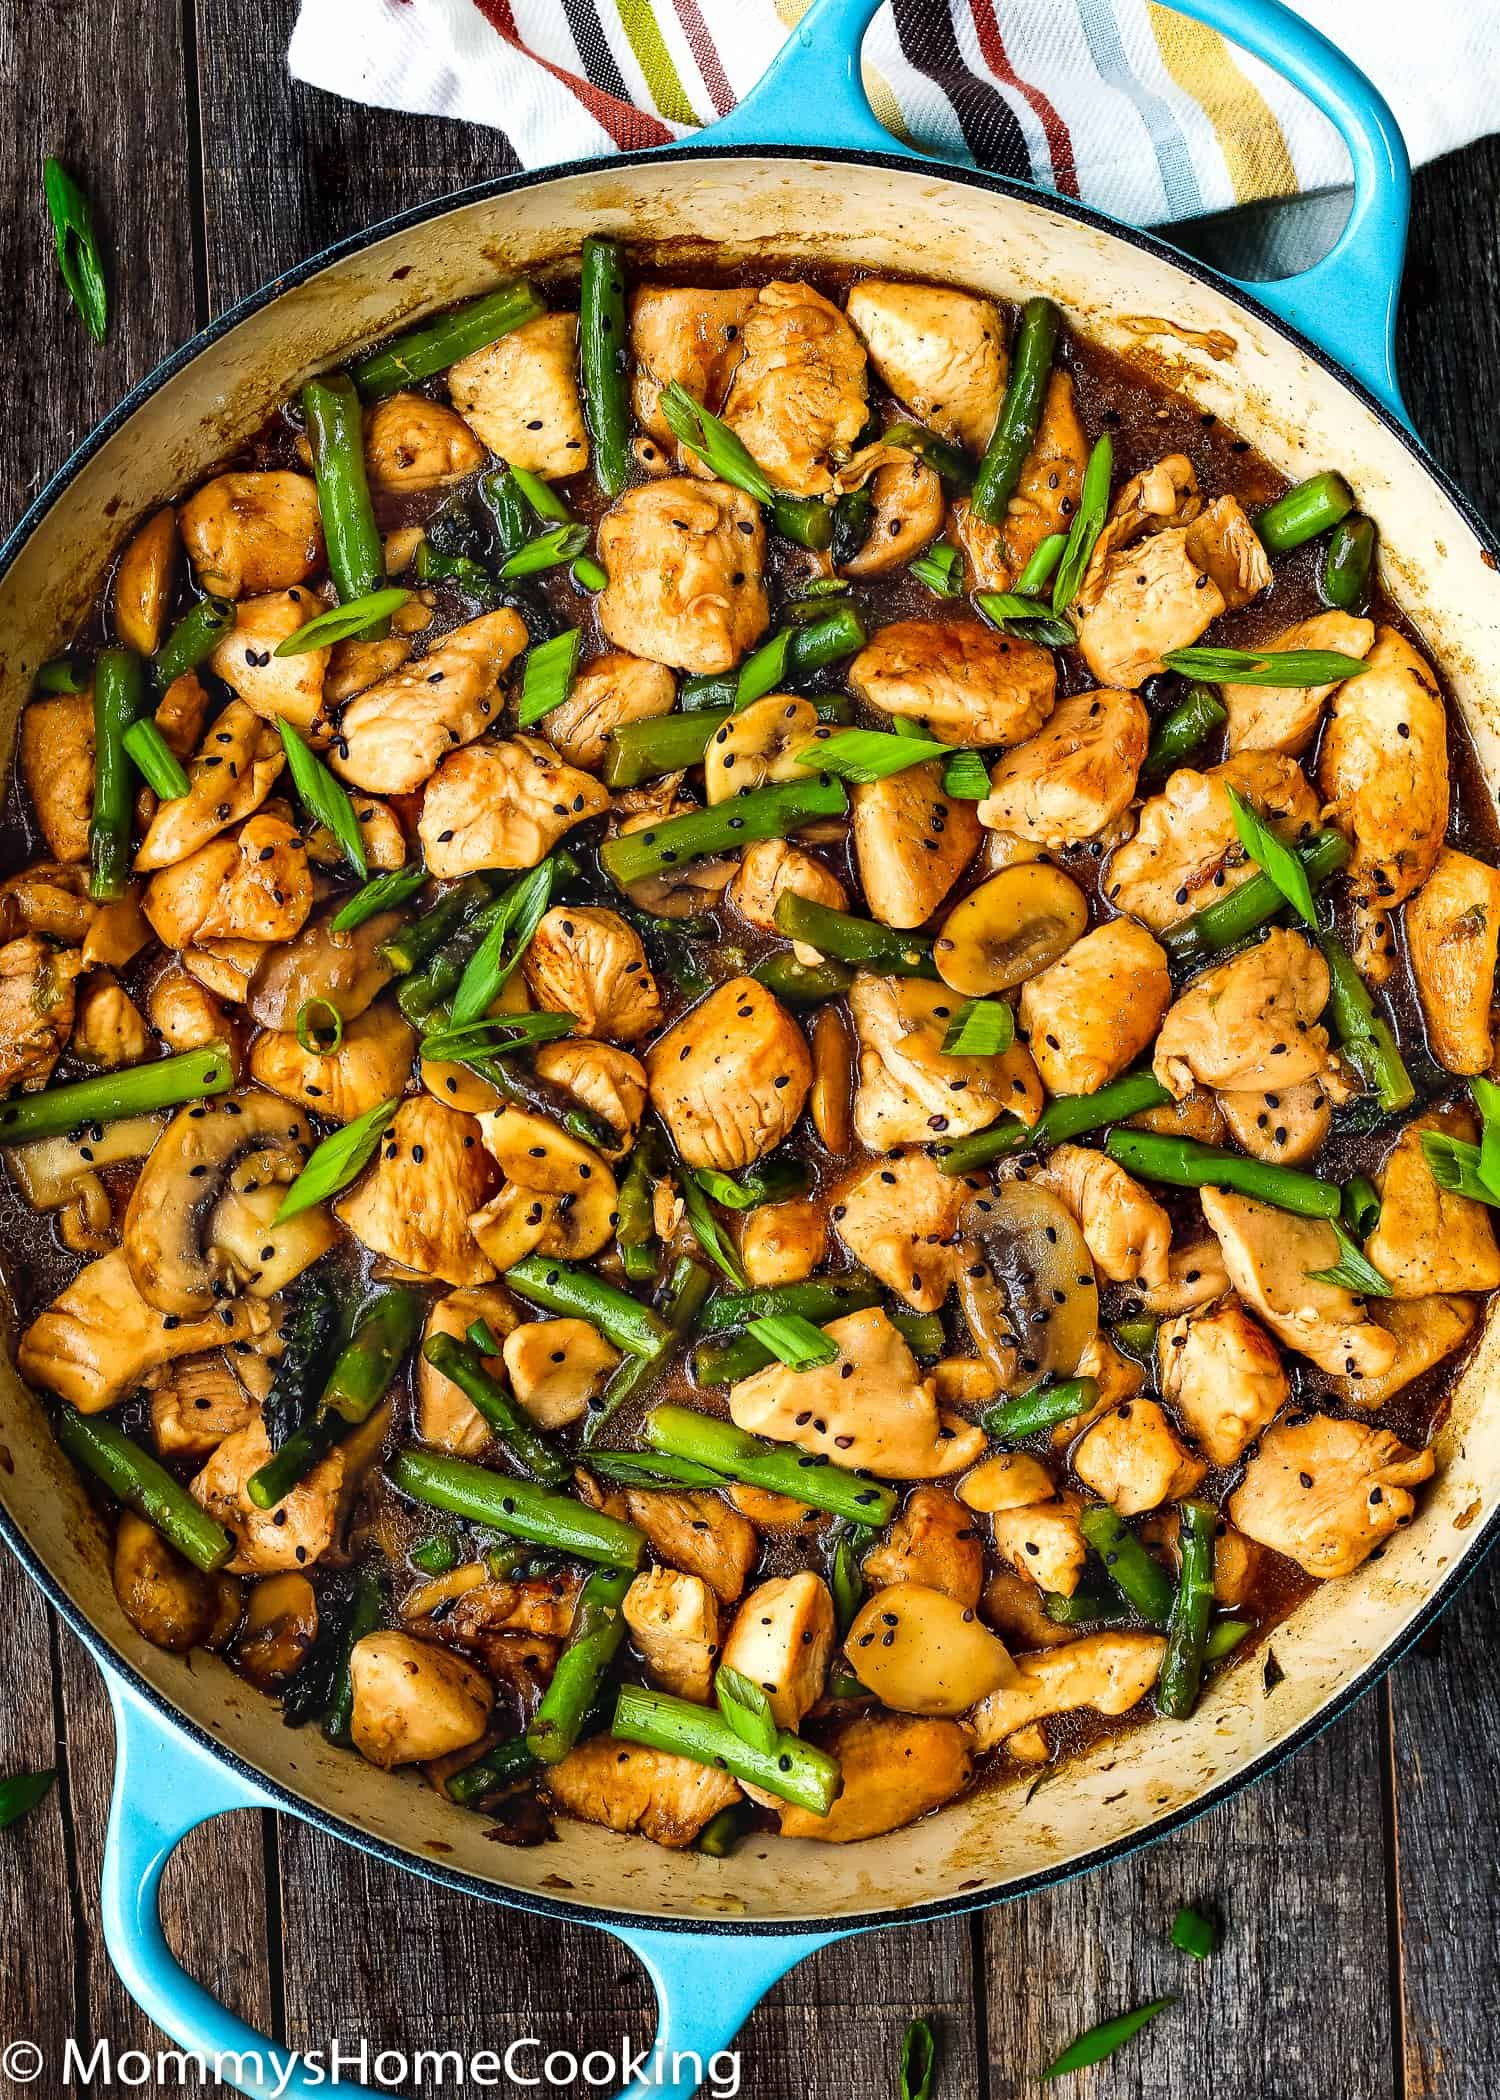 Easy Healthy Recipes For Dinner
 Easy Healthy Chicken and Asparagus Skillet Mommy s Home